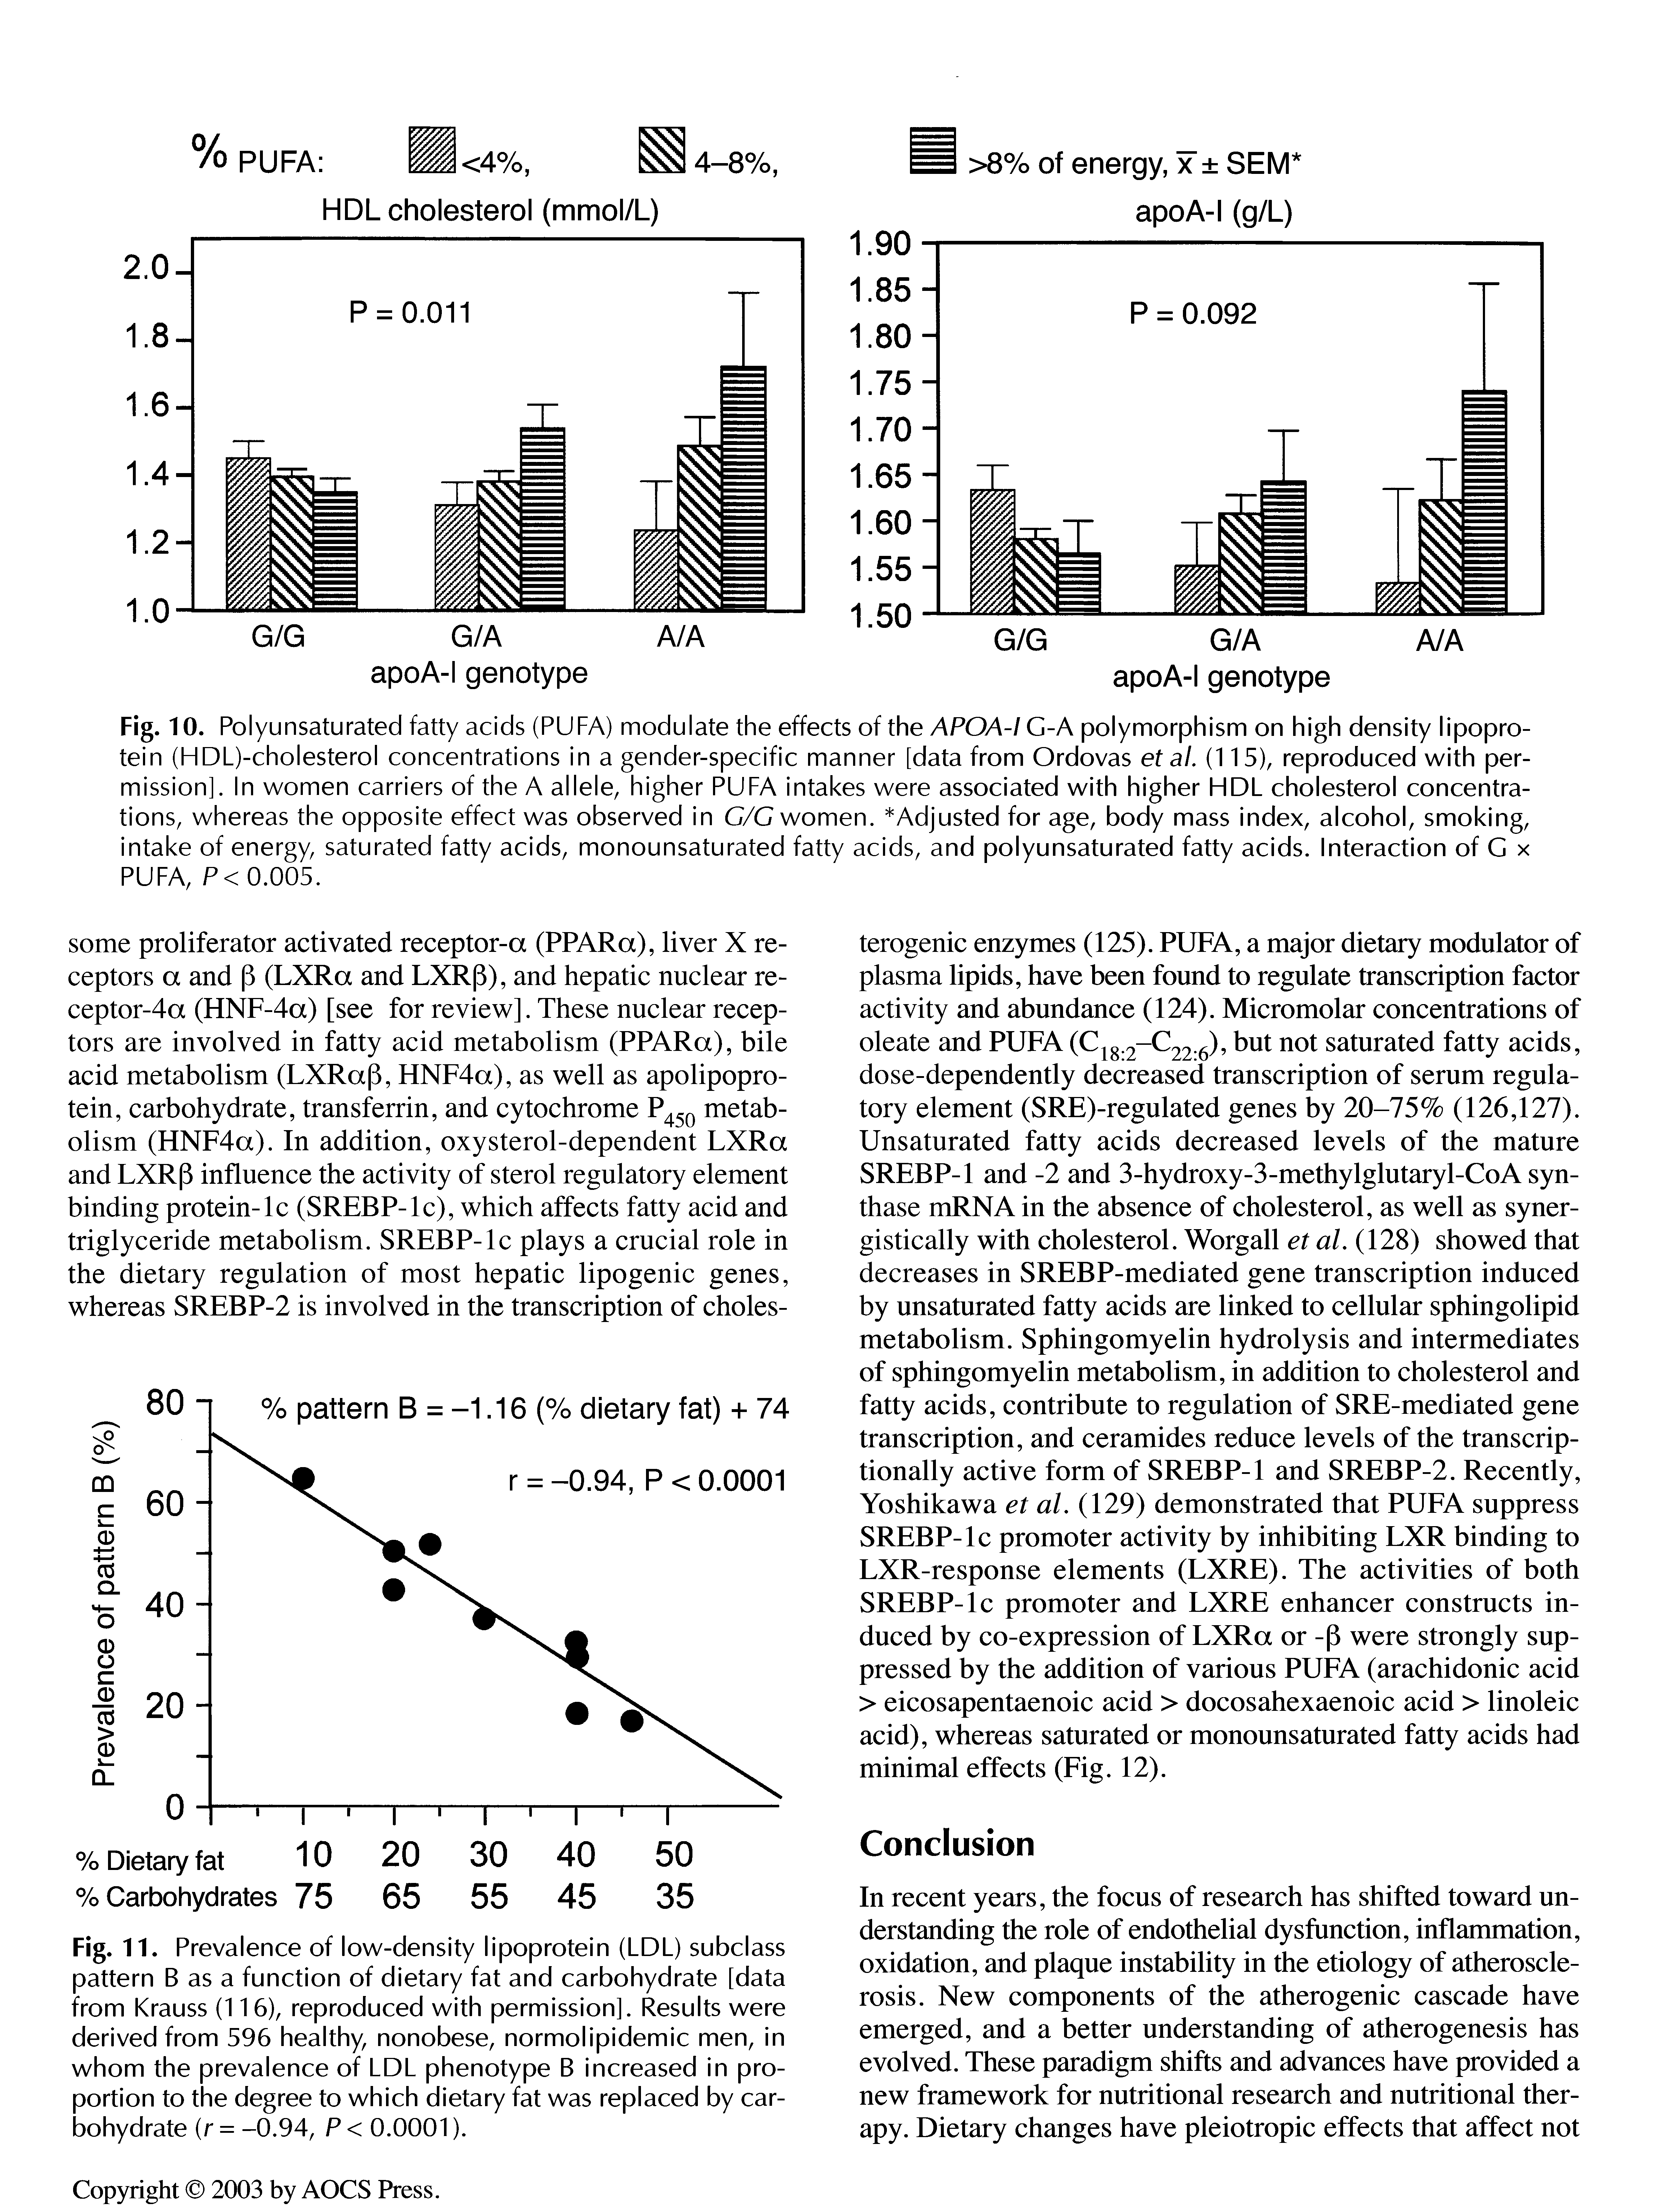 Fig. 10. Polyunsaturated fatty acids (PUFA) modulate the effects of the APOA-IG-A polymorphism on high density lipoprotein (HDL)-cholesterol concentrations in a gender-specific manner [data from Ordovas etal. (115), reproduced with permission]. In women carriers of the A allele, higher PUFA intakes were associated with higher HDL cholesterol concentrations, whereas the opposite effect was observed in G/G women. Adjusted for age, body mass index, alcohol, smoking, intake of energy, saturated fatty acids, monounsaturated fatty acids, and polyunsaturated fatty acids. Interaction of G x PUFA, P< 0.005.